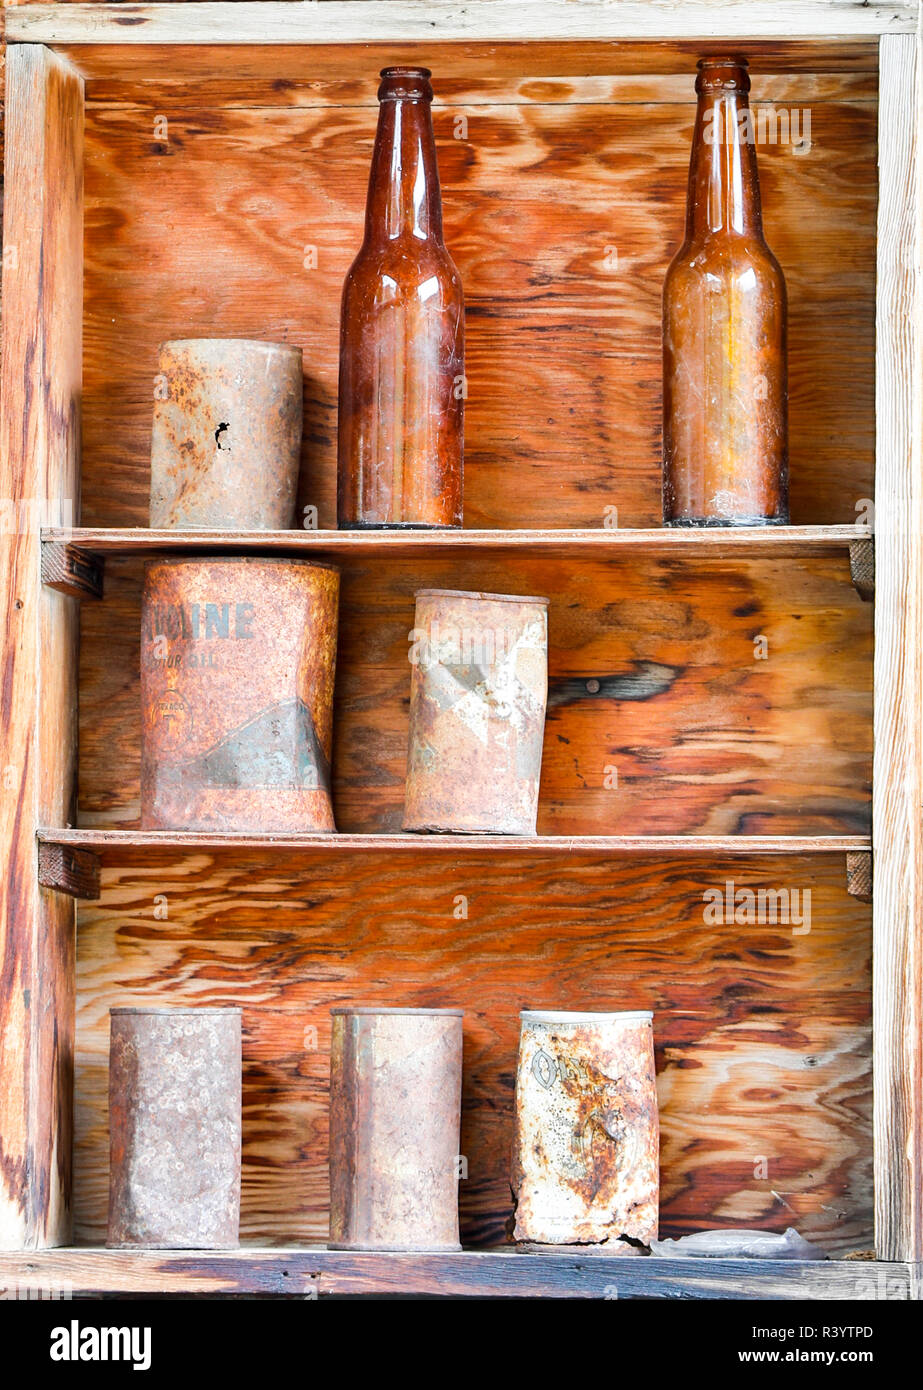 USA, Montana. Garnet, Ghost Town, Shelves of antique bottles and cans Stock Photo